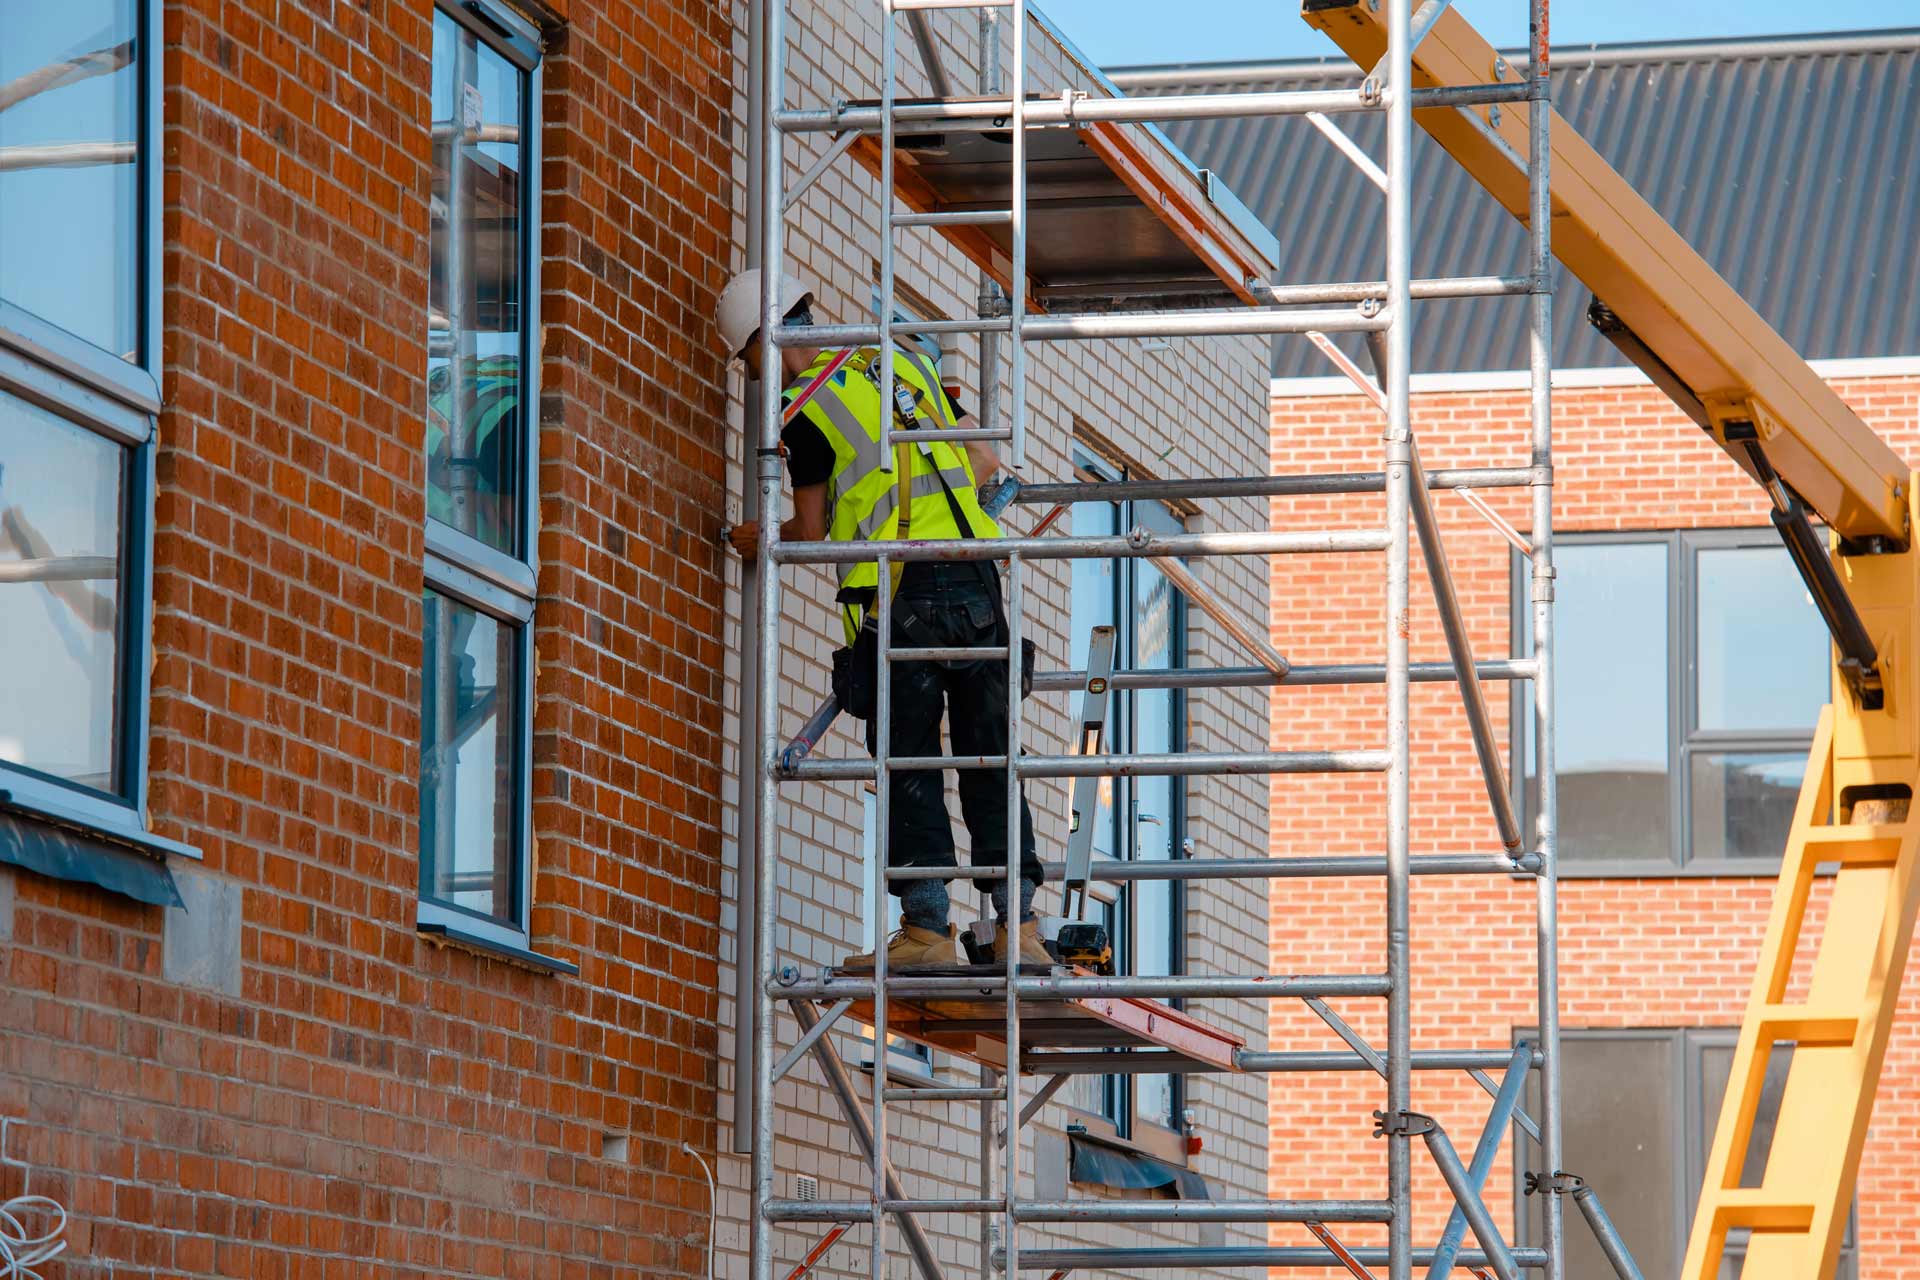 Construction workers using aluminum mobile scaffold tower and safety harness to work at height.